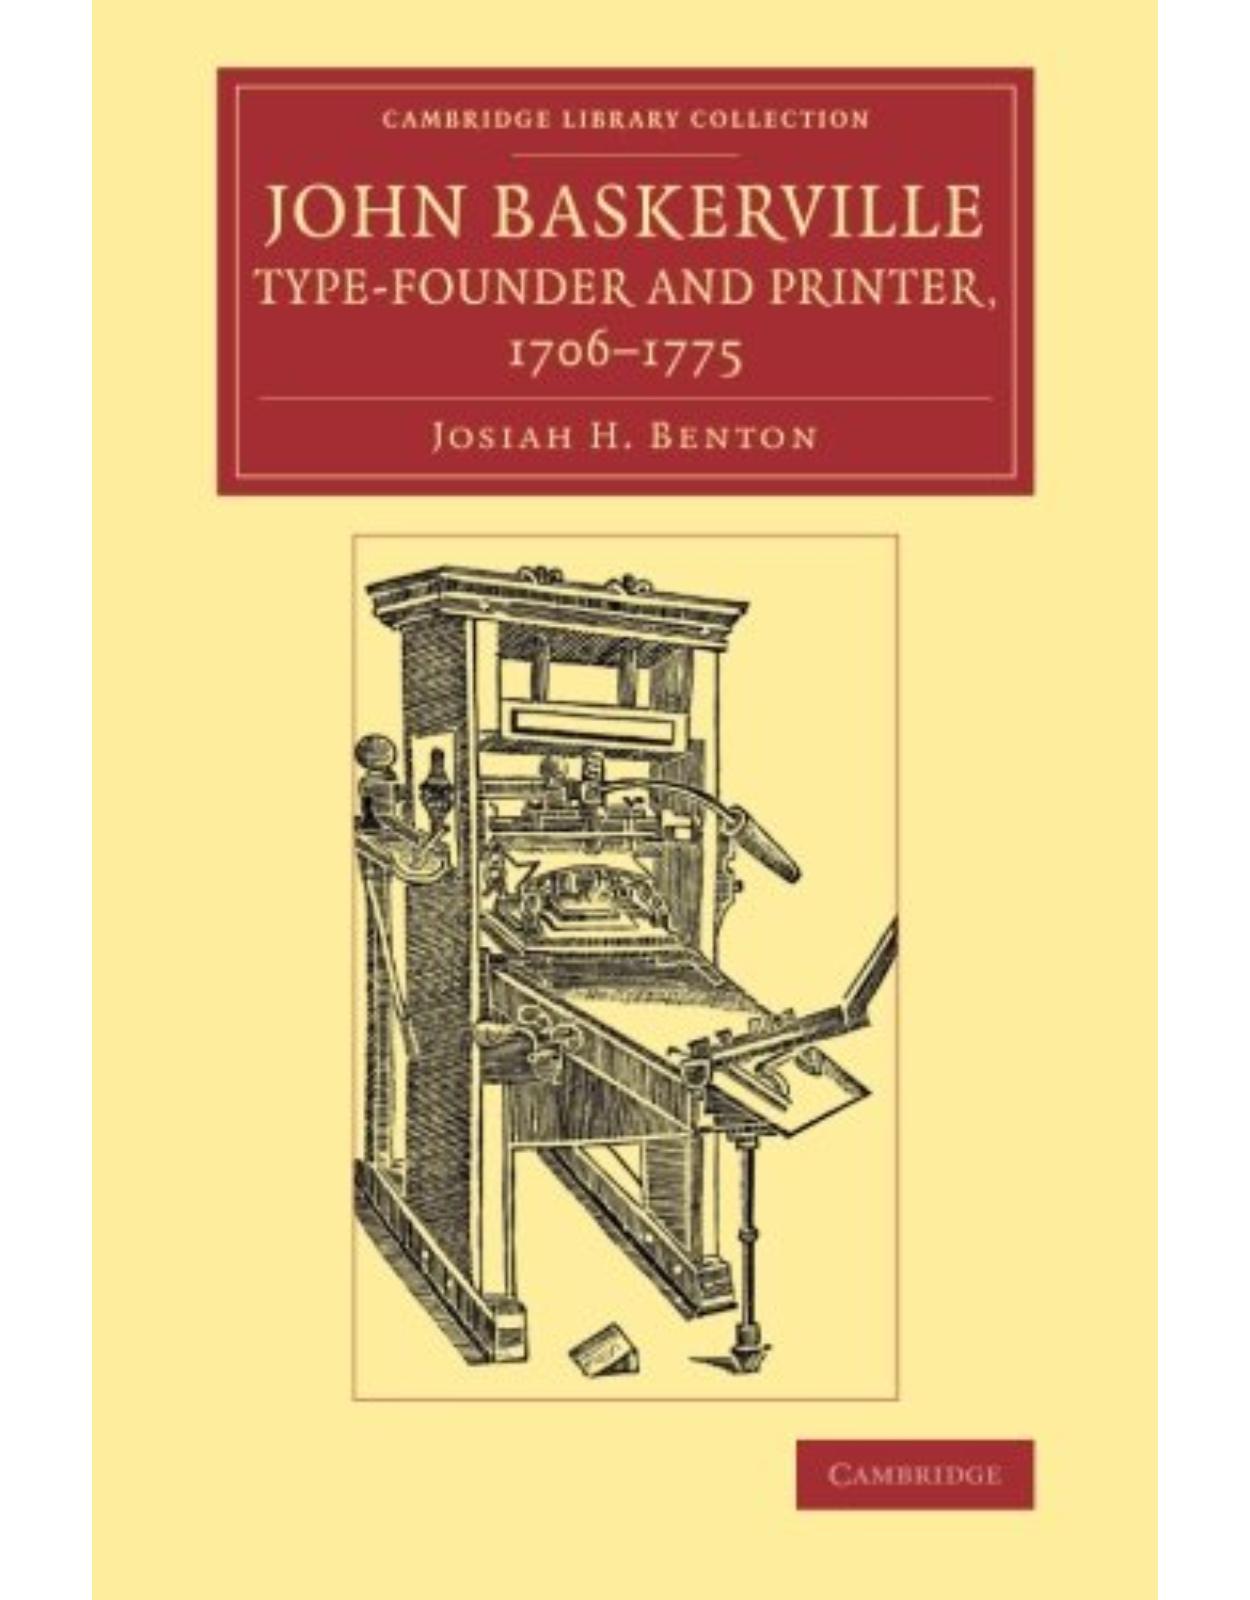 John Baskerville, Type-Founder and Printer, 1706-1775: Volume 0 (Cambridge Library Collection - History of Printing, Publishing and Libraries)